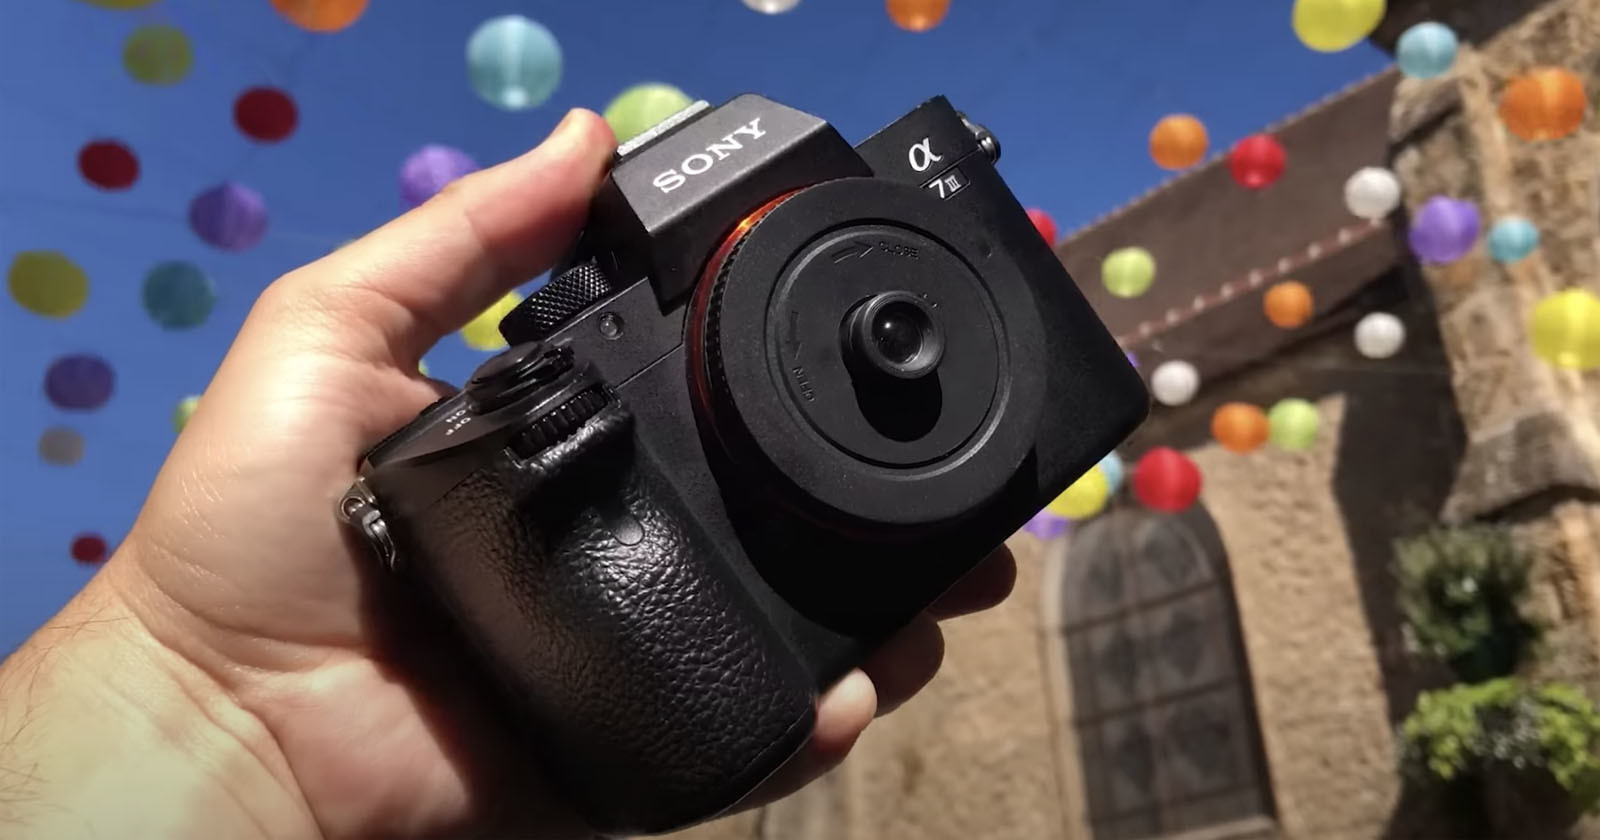 Photographer Recreates the 90s Look with a DIY Disposable Camera Lens